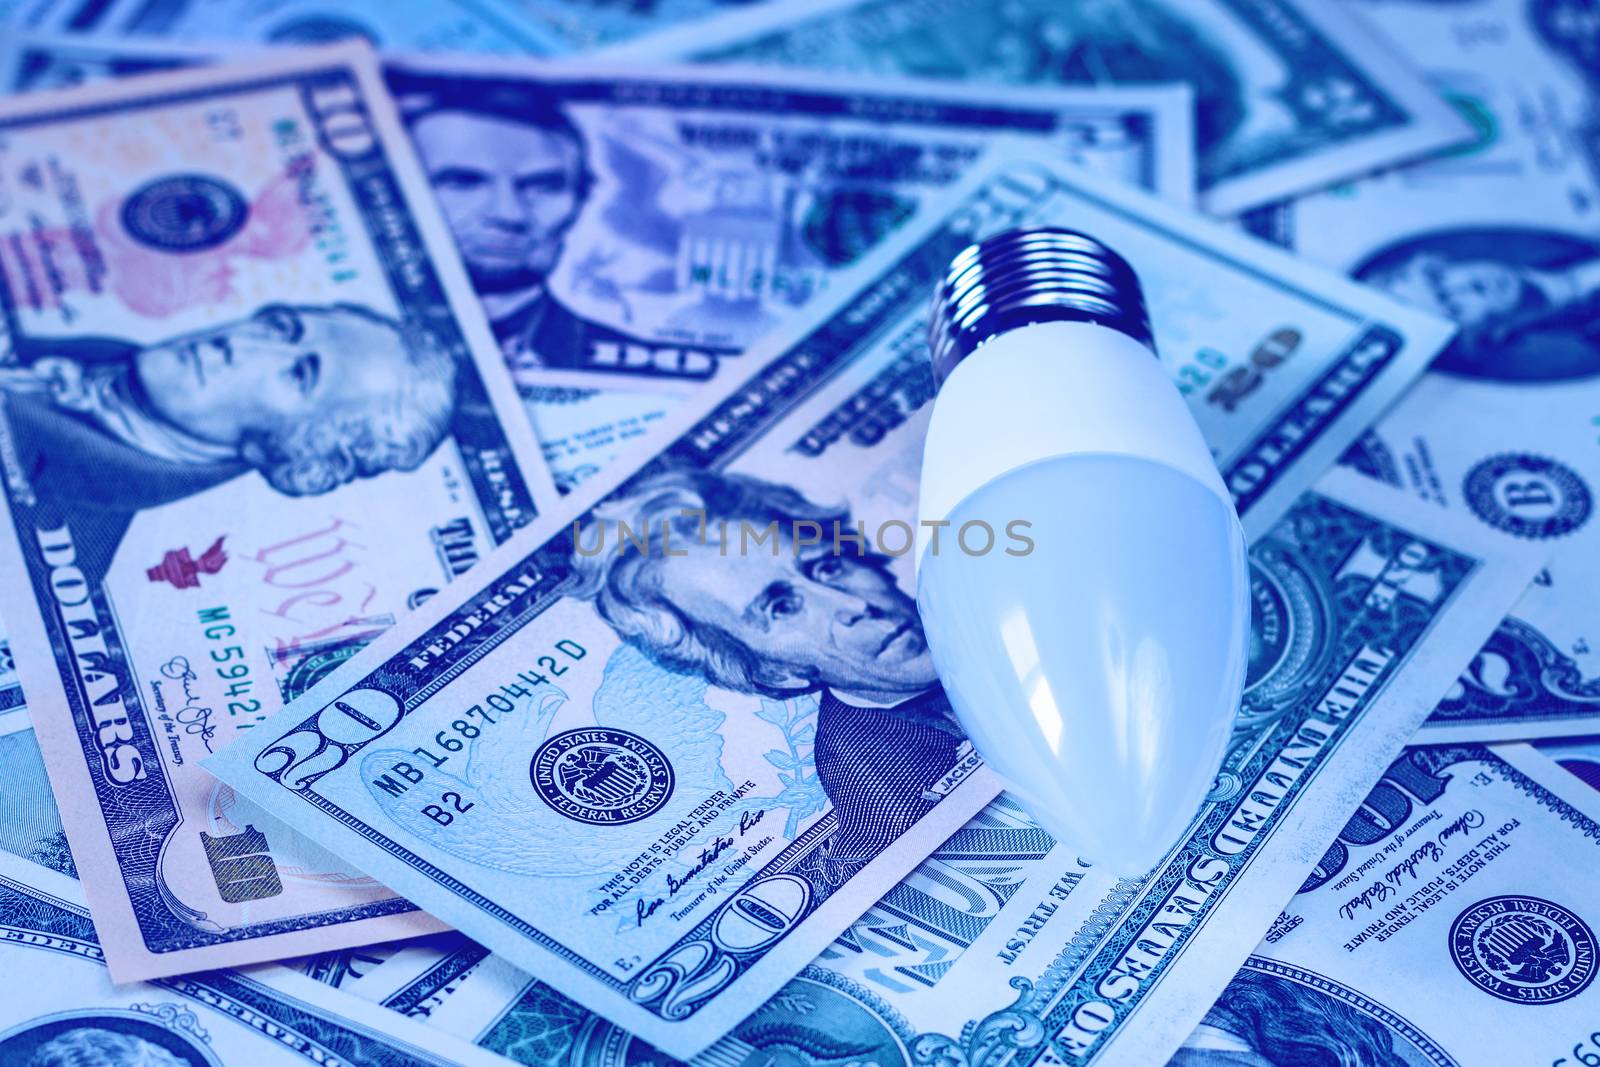 LED lamp on dollar bills background. The concept of saving money on electricity.